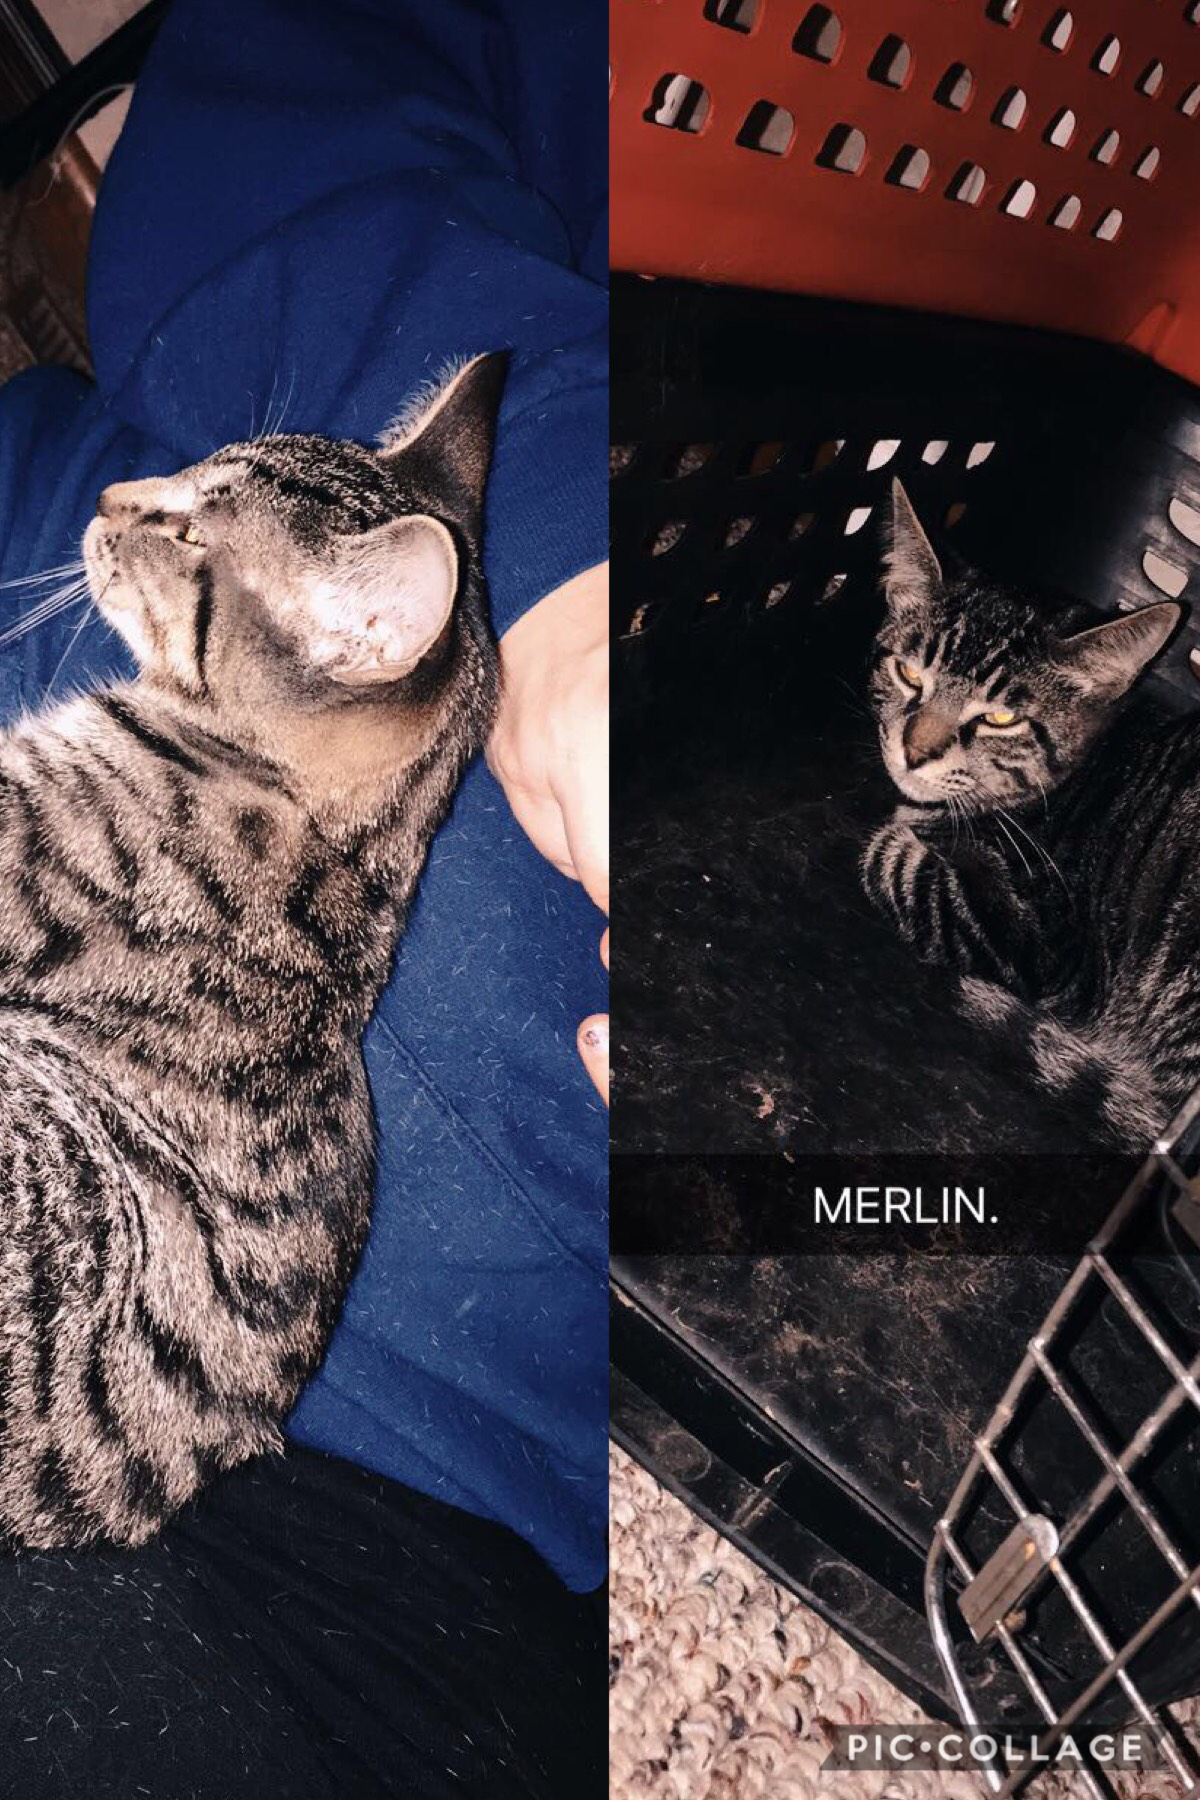 Left is Ophelia, and right is Merlin.😌😌 we named him Merlin cause I’m getting into Merlin and my parents lOVE merlin😂😂 and Ophelia cause she’s just so fabulous😂 I love them sm😌😌